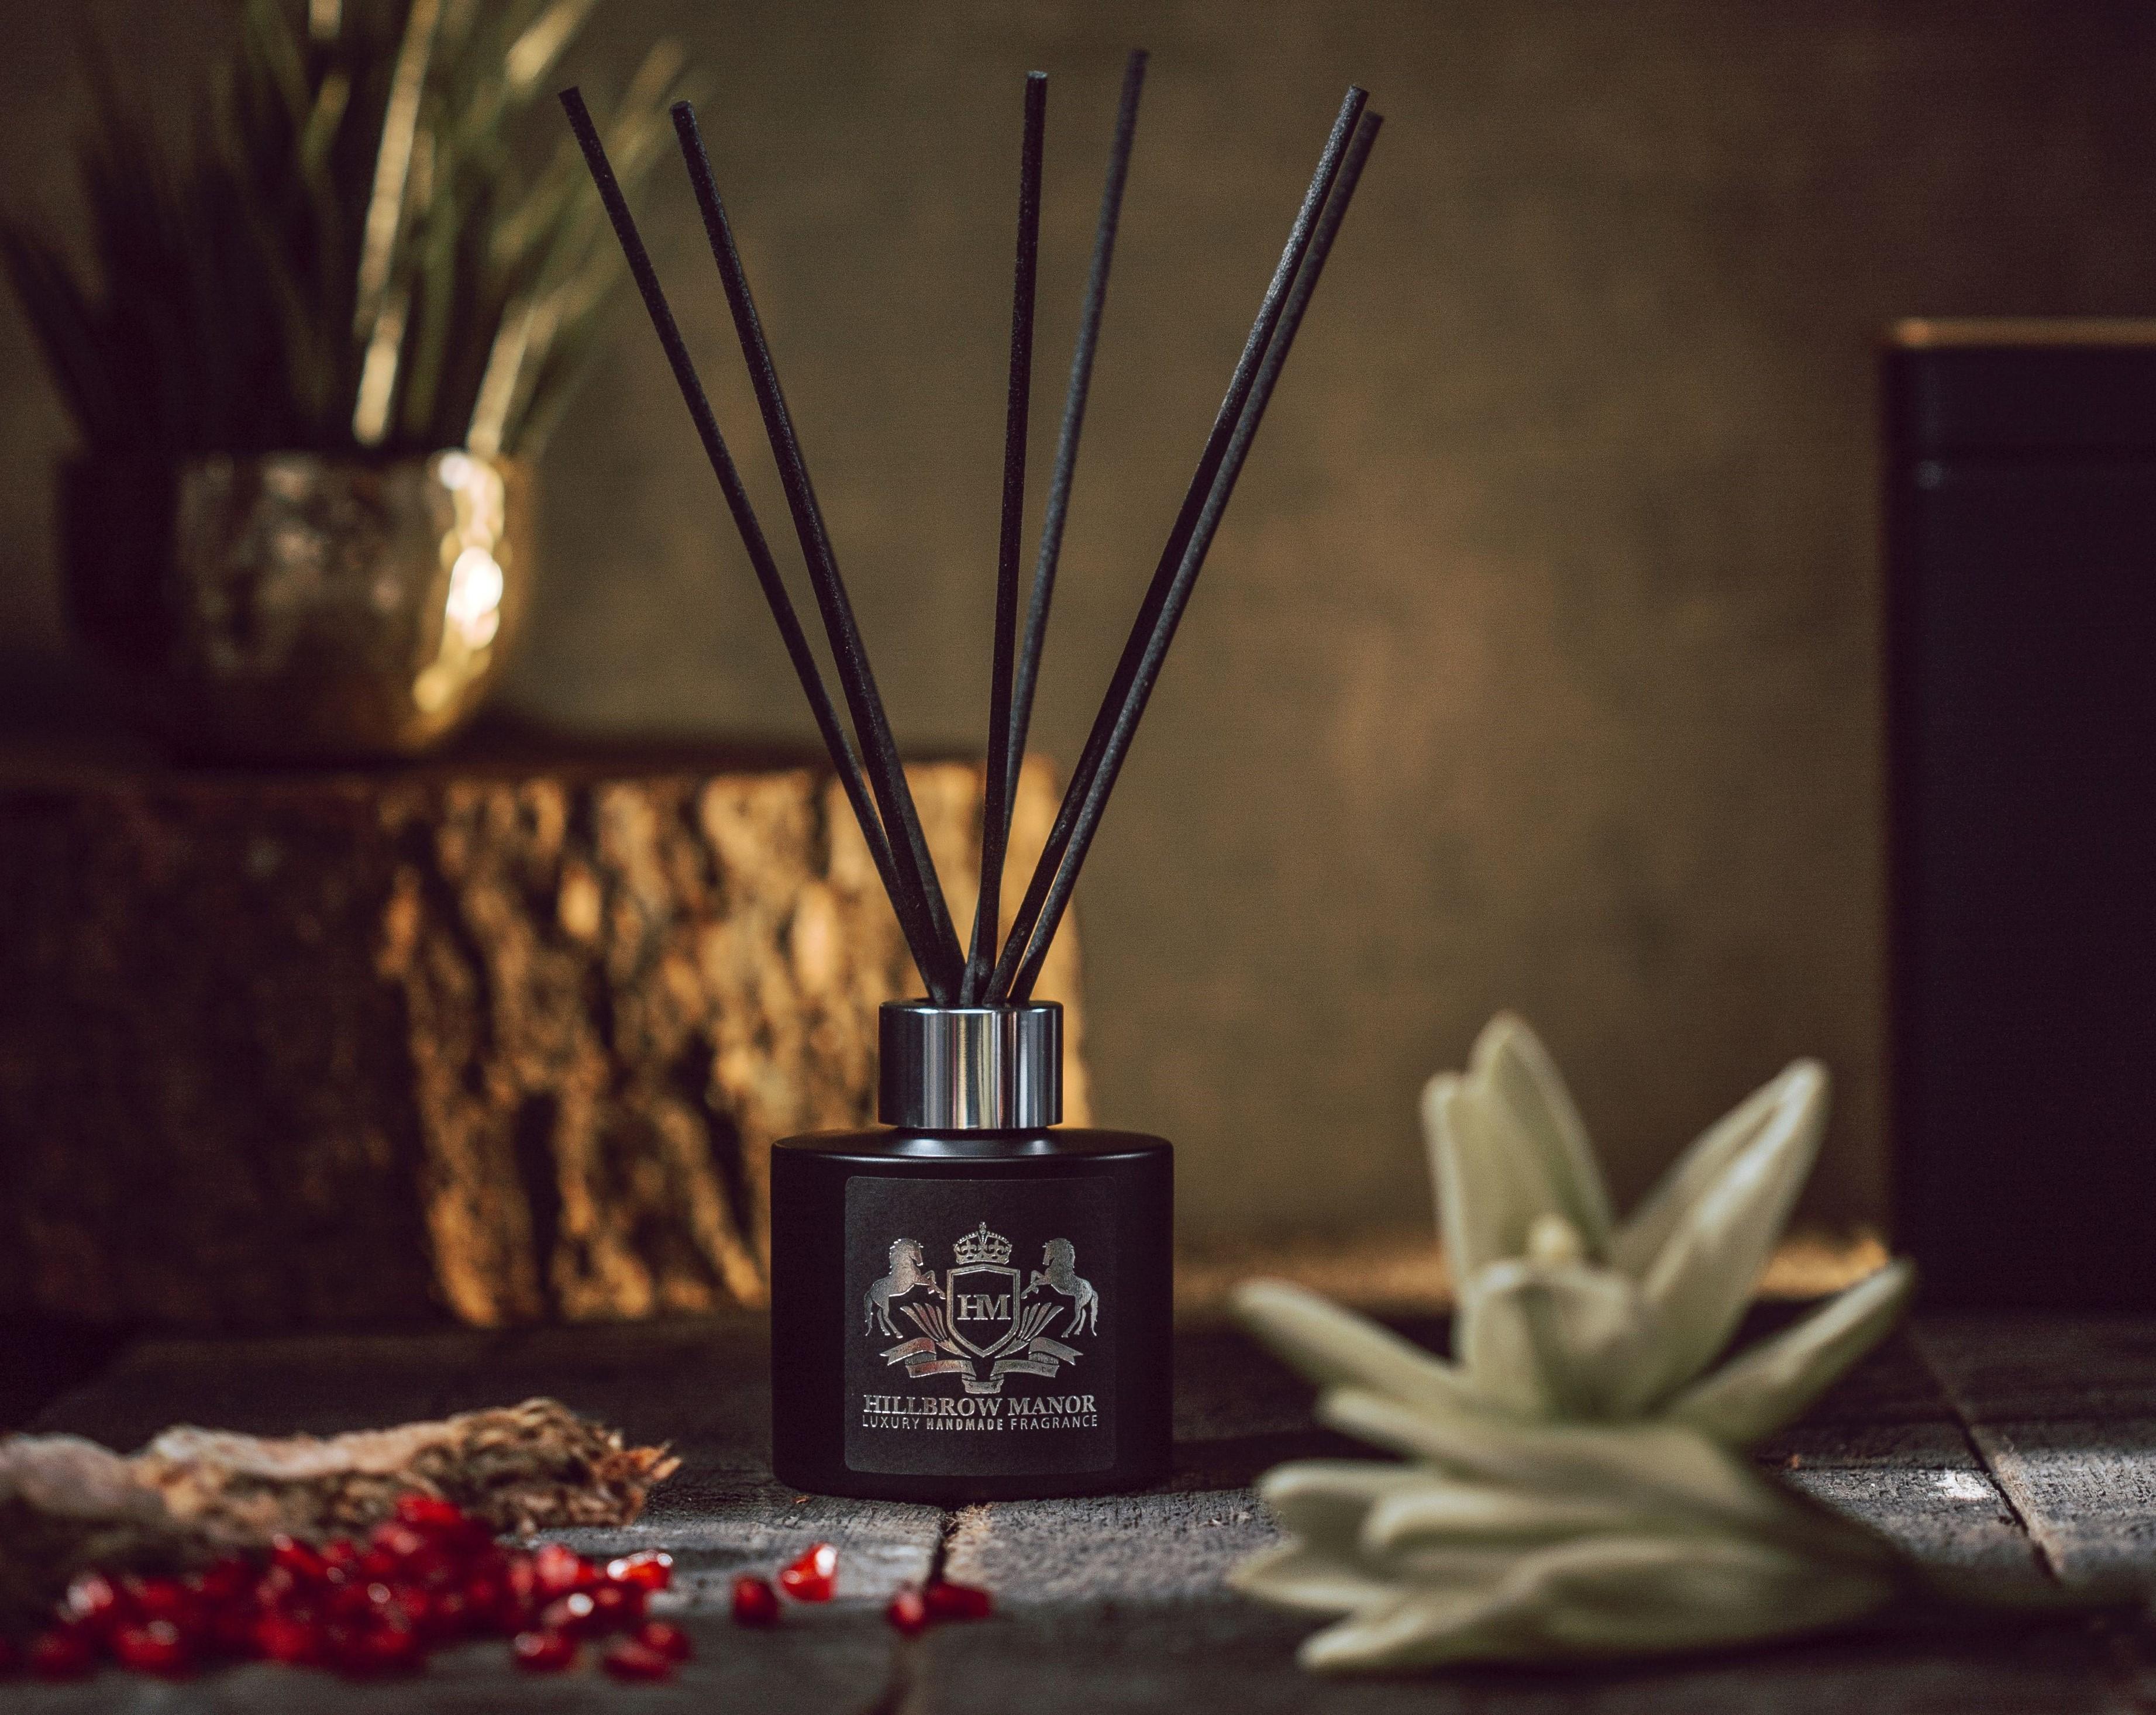 100ml Reed Diffusers in a range of fragrances